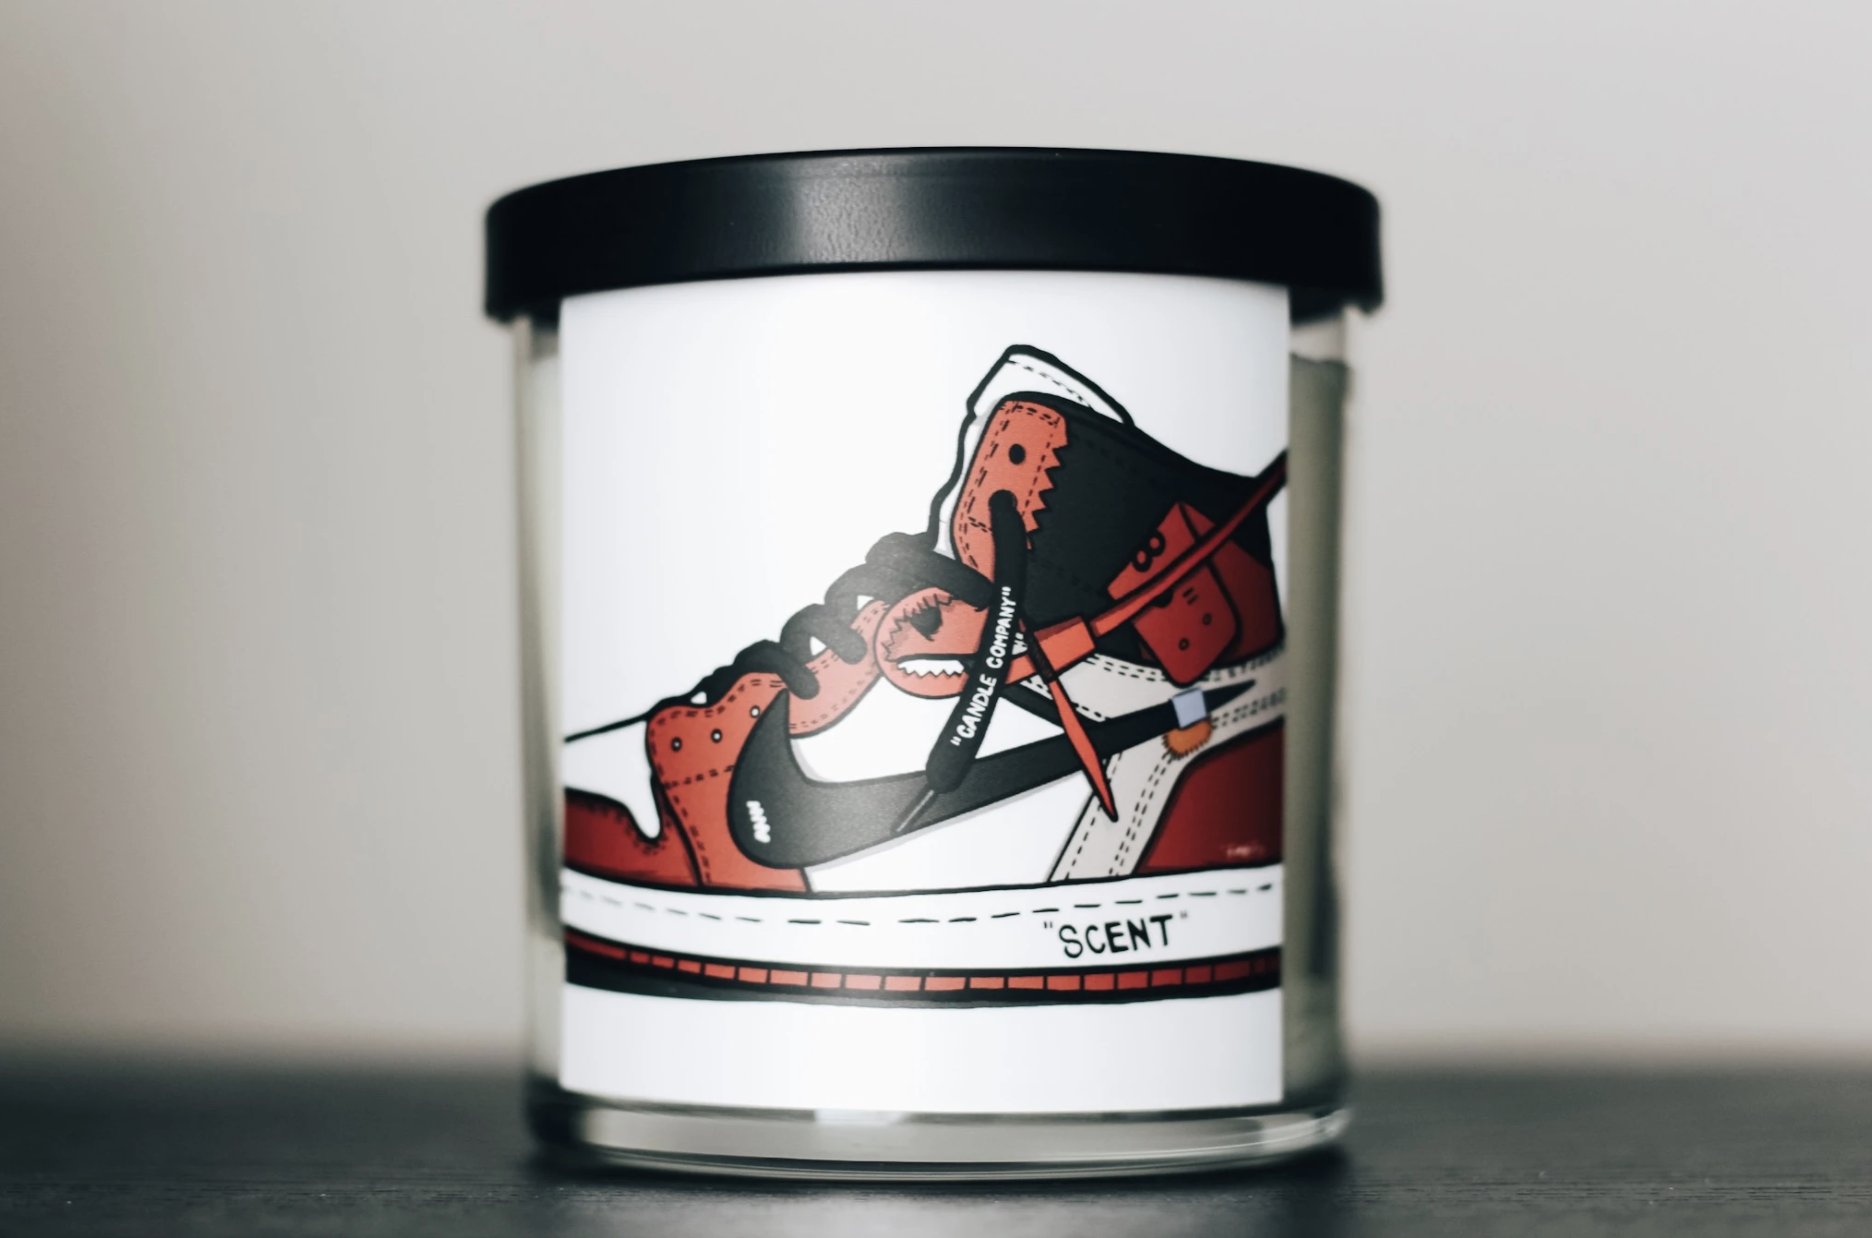 The candle has a picture of a red, black and white Air Jordan 1 sneaker on it 